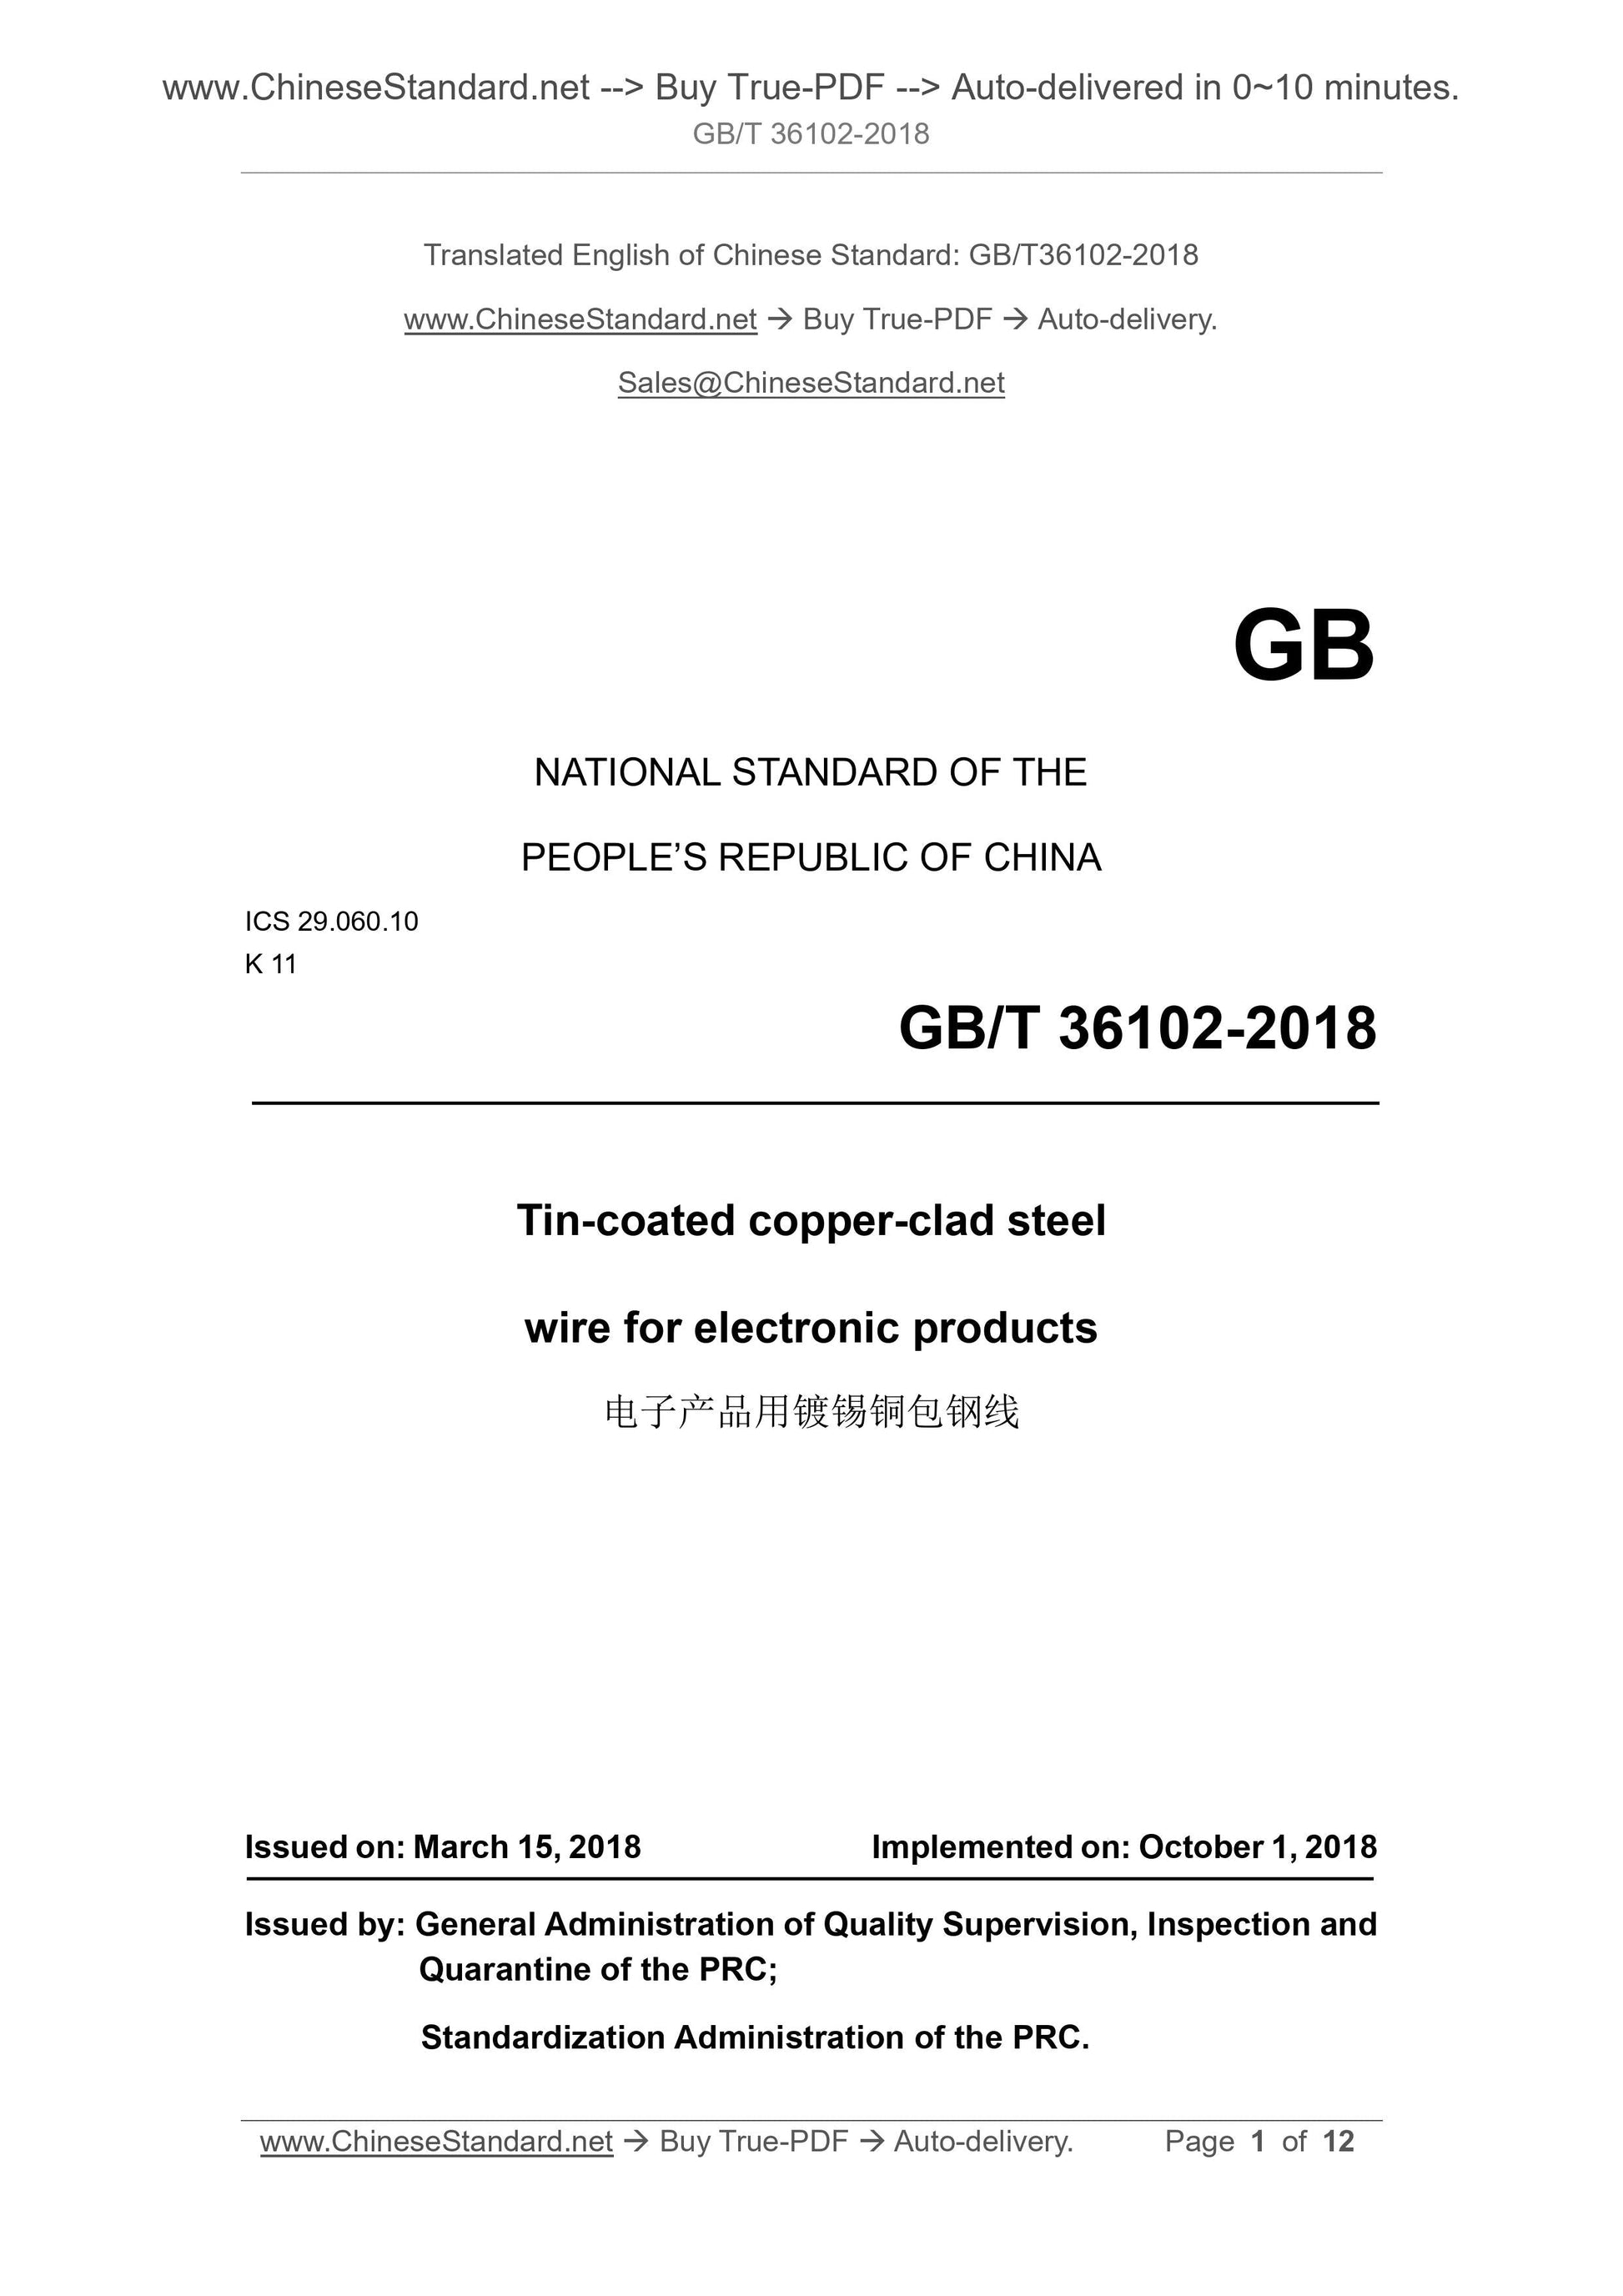 GB/T 36102-2018 Page 1